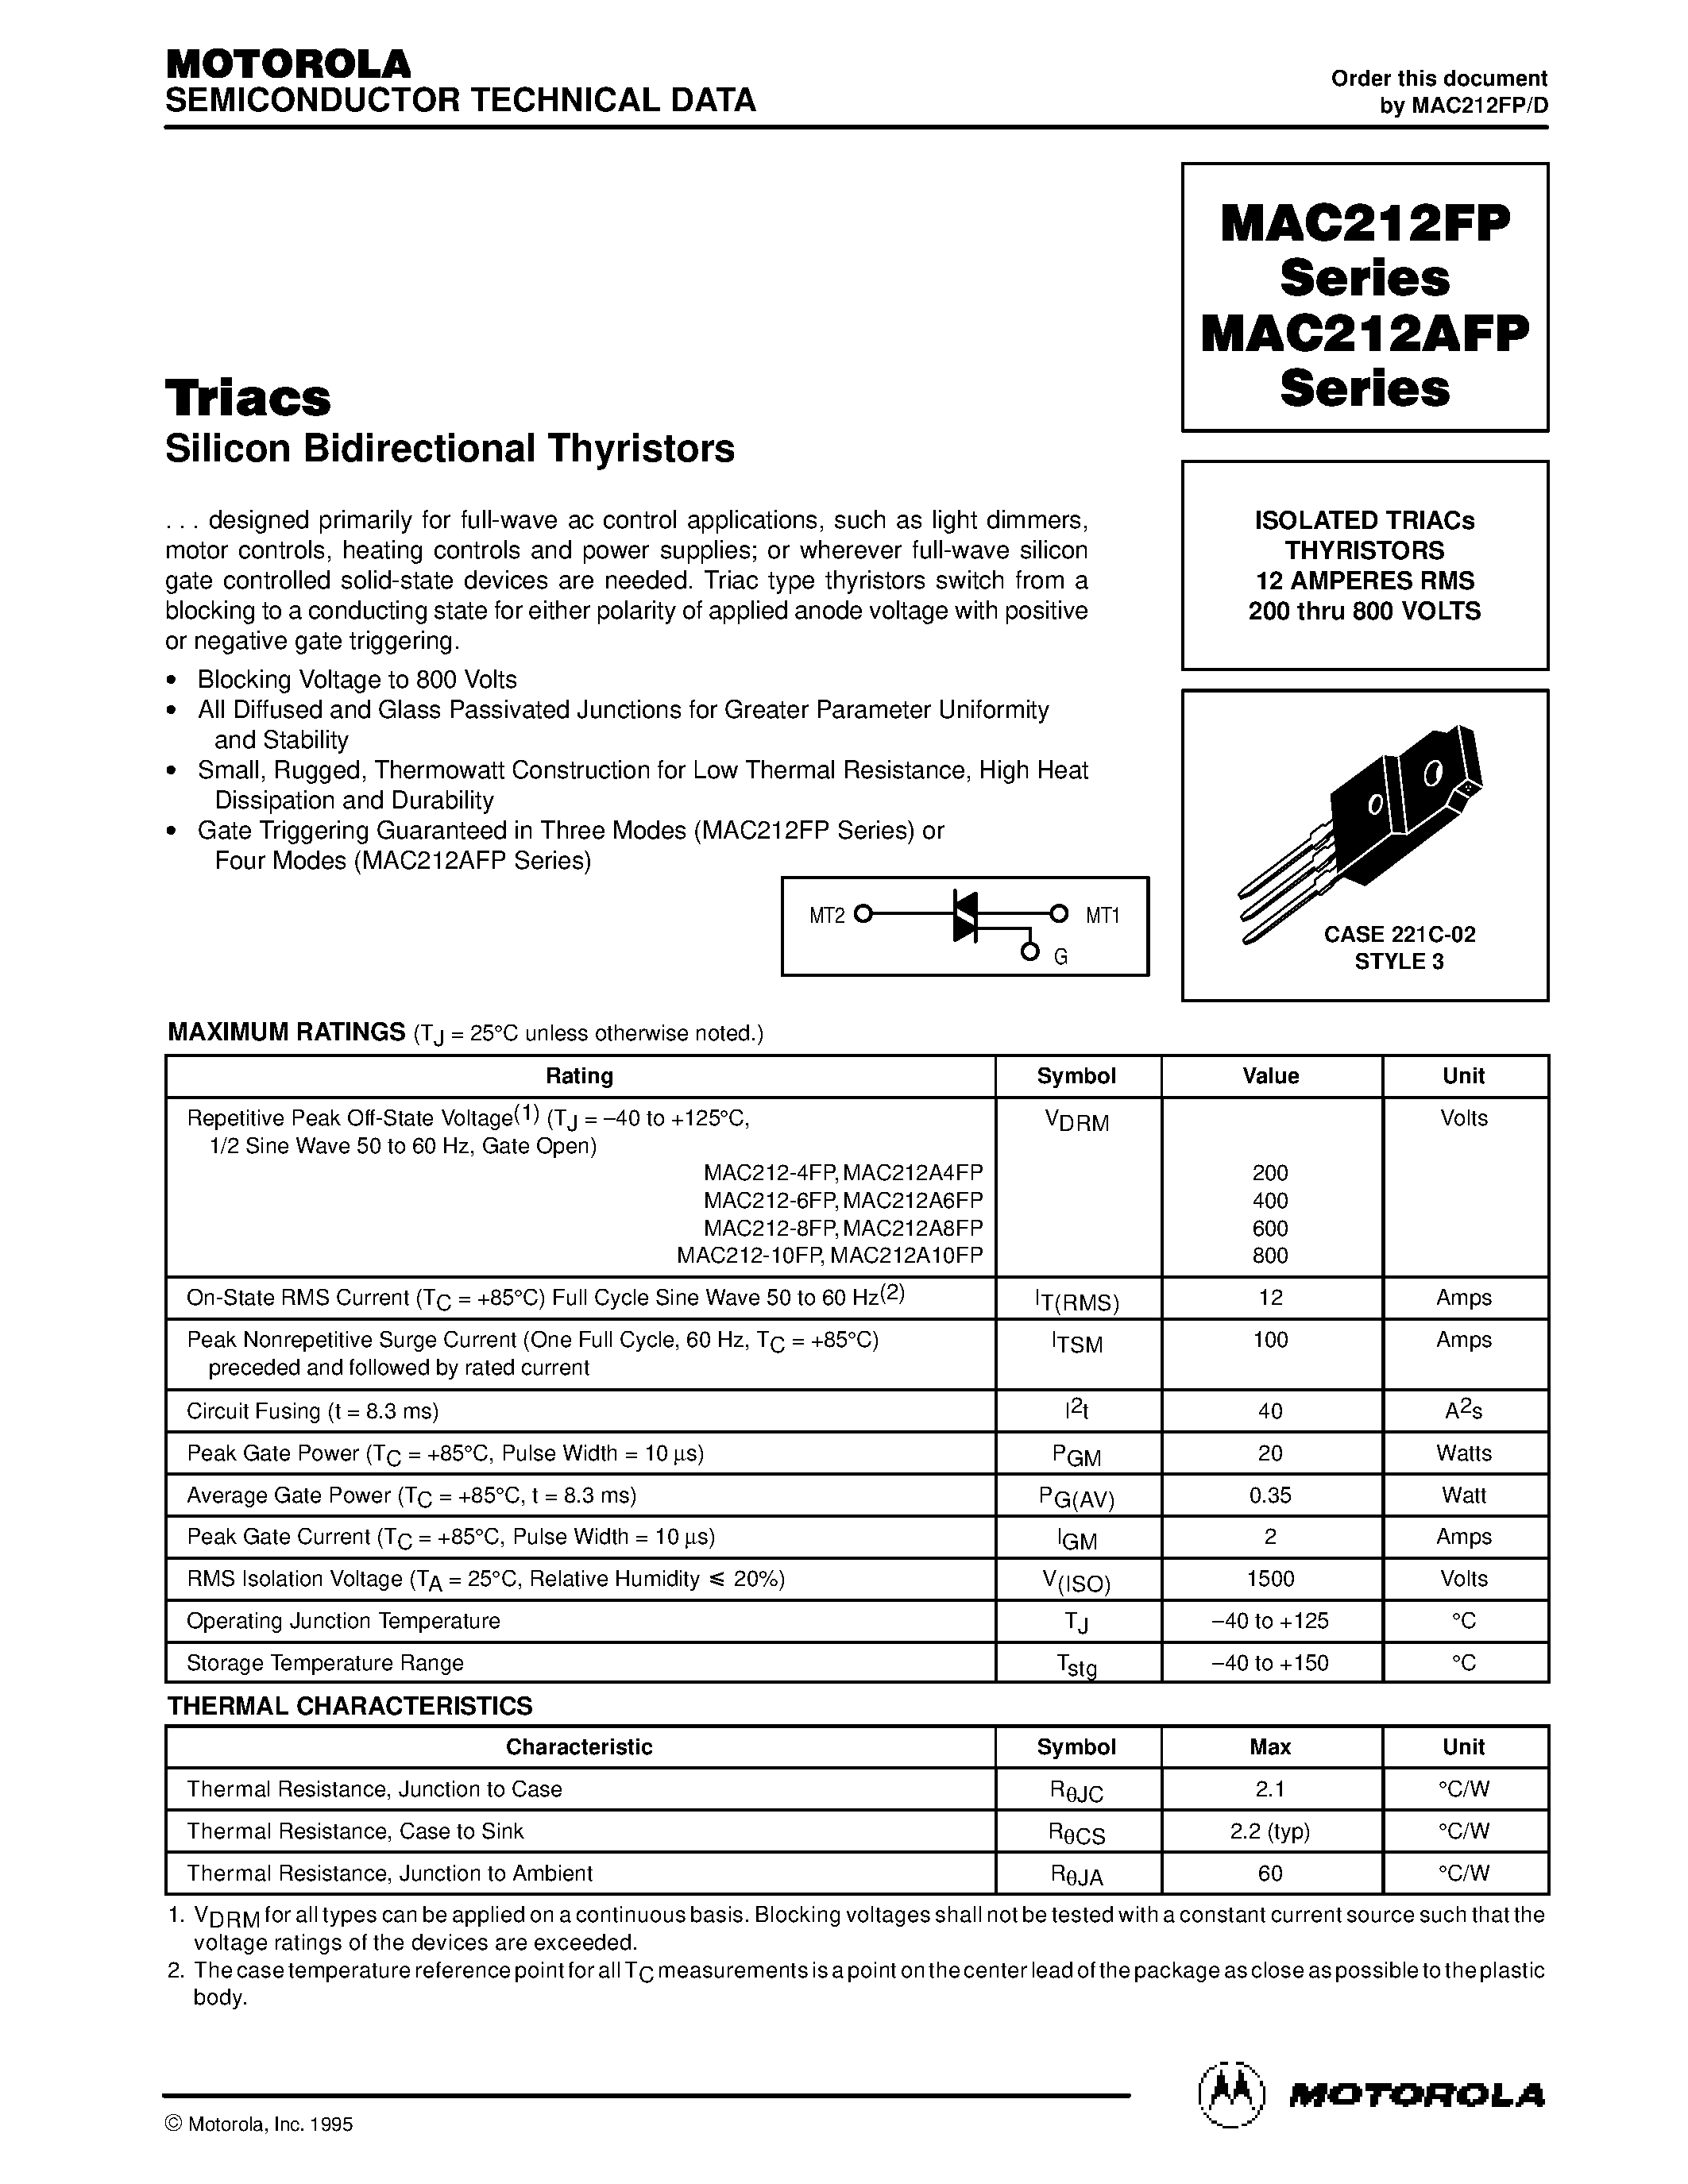 Datasheet MAC212-10FP - ISOLATED TRIACs THYRISTORS 12 AMPERES RMS 200 thru 800 VOLTS page 1